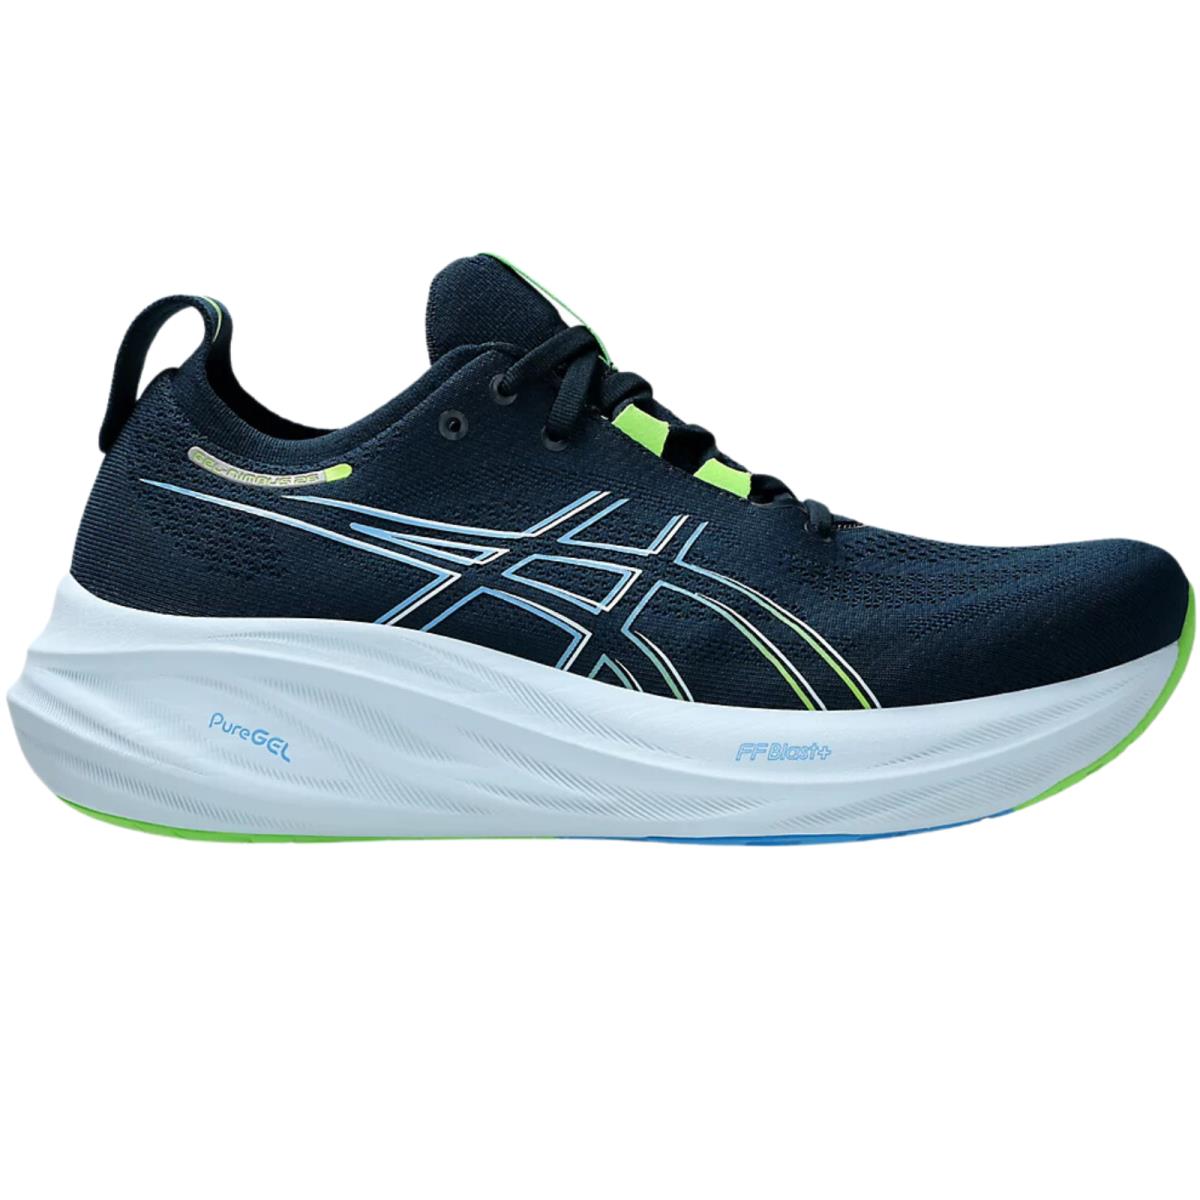 Men`s Asics Gel-nimbus 26 Running Shoes All Colors US Sizes 7-14 French Blue/Electric Lime